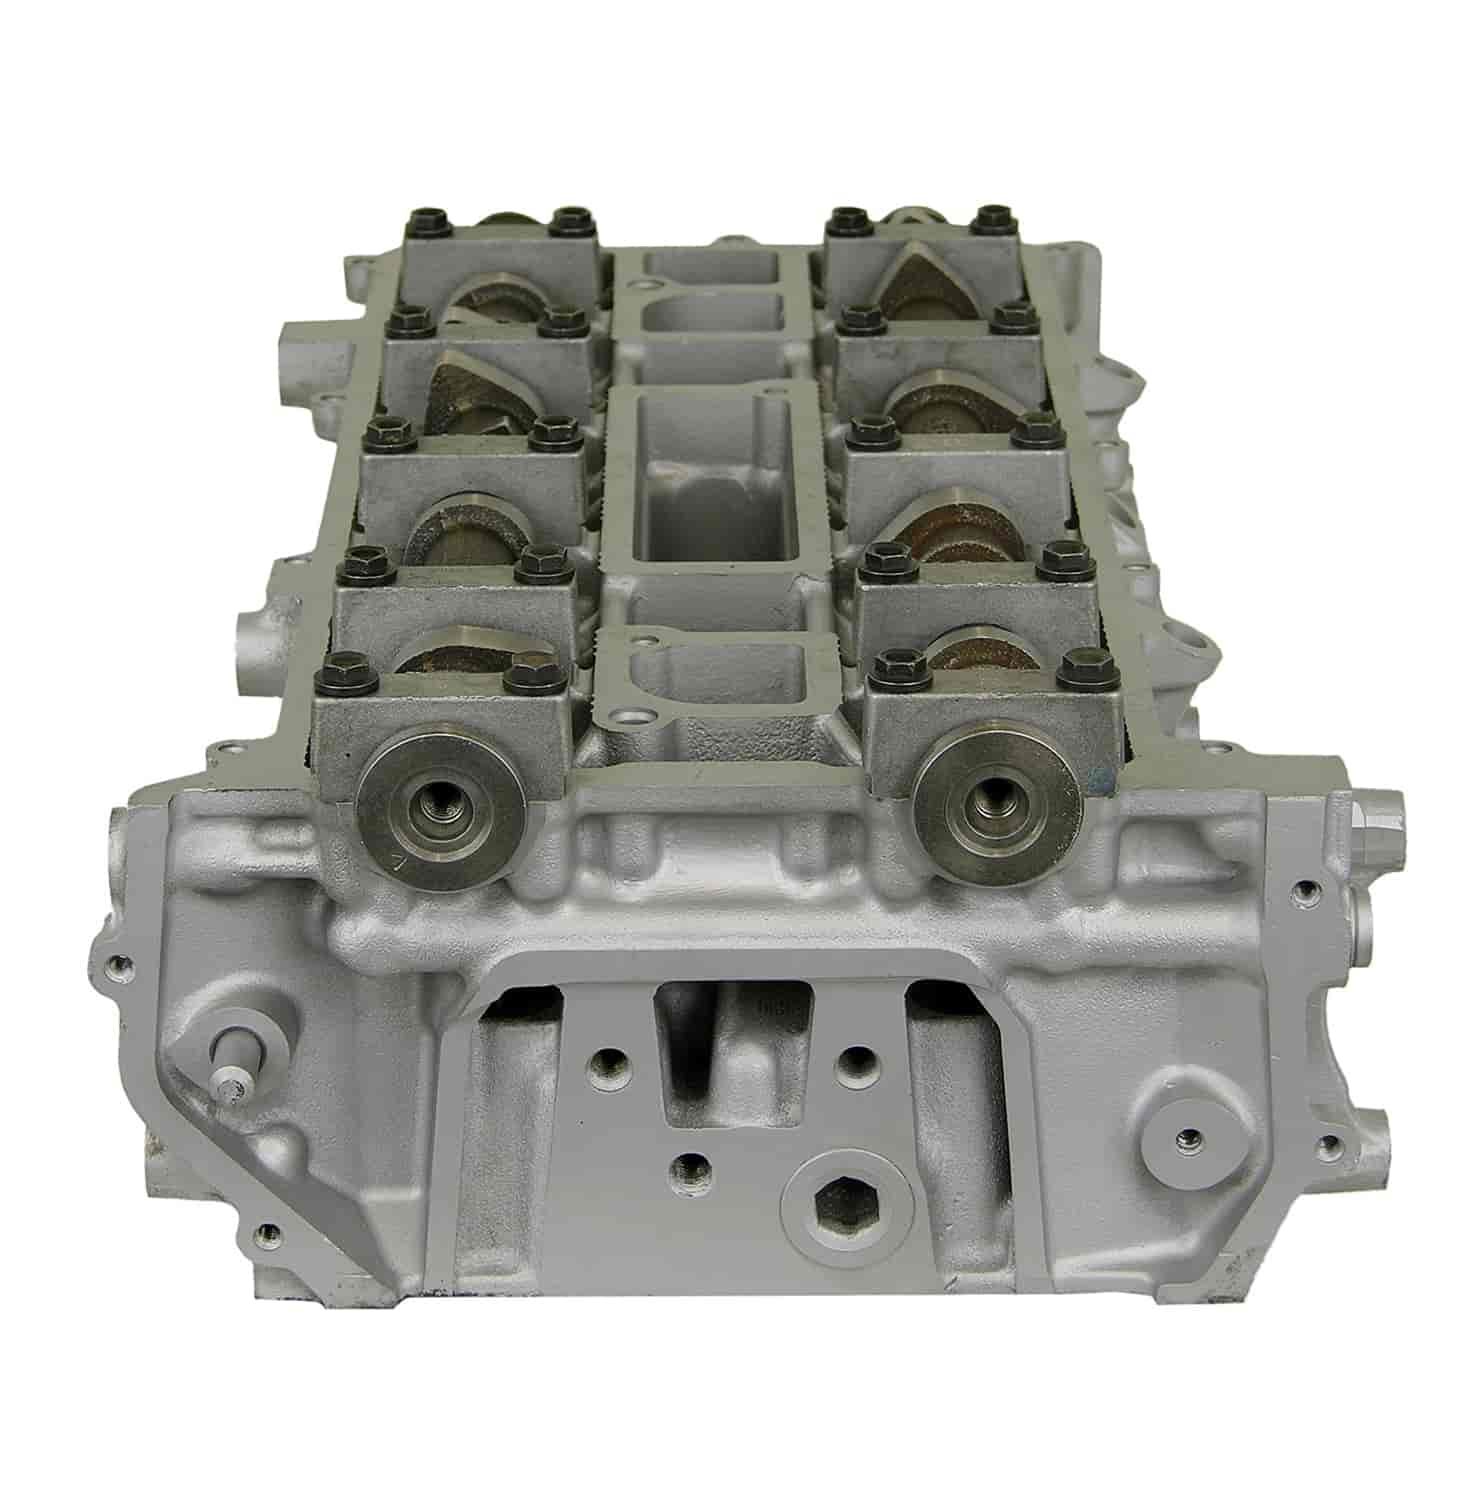 Remanufactured Cylinder Head for 2001-2002 Ford/Mazda with 2.3L L4